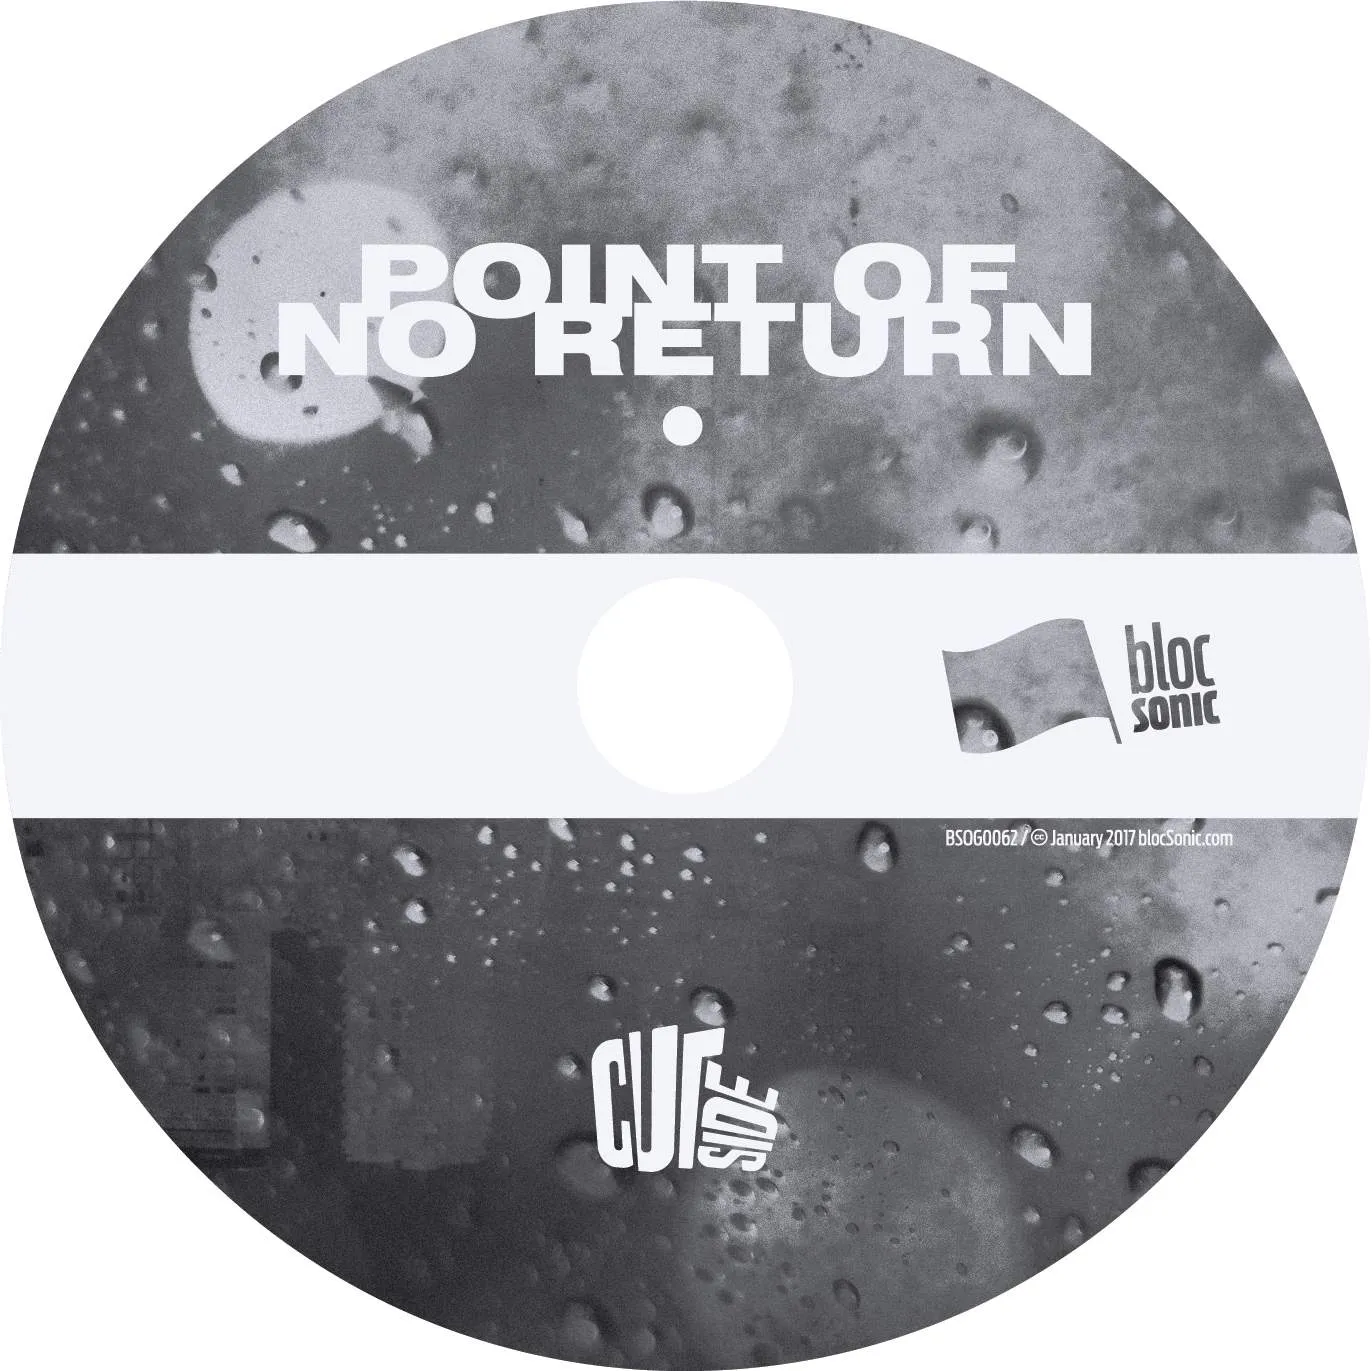 Album disc for “Point Of No Return” by Cutside